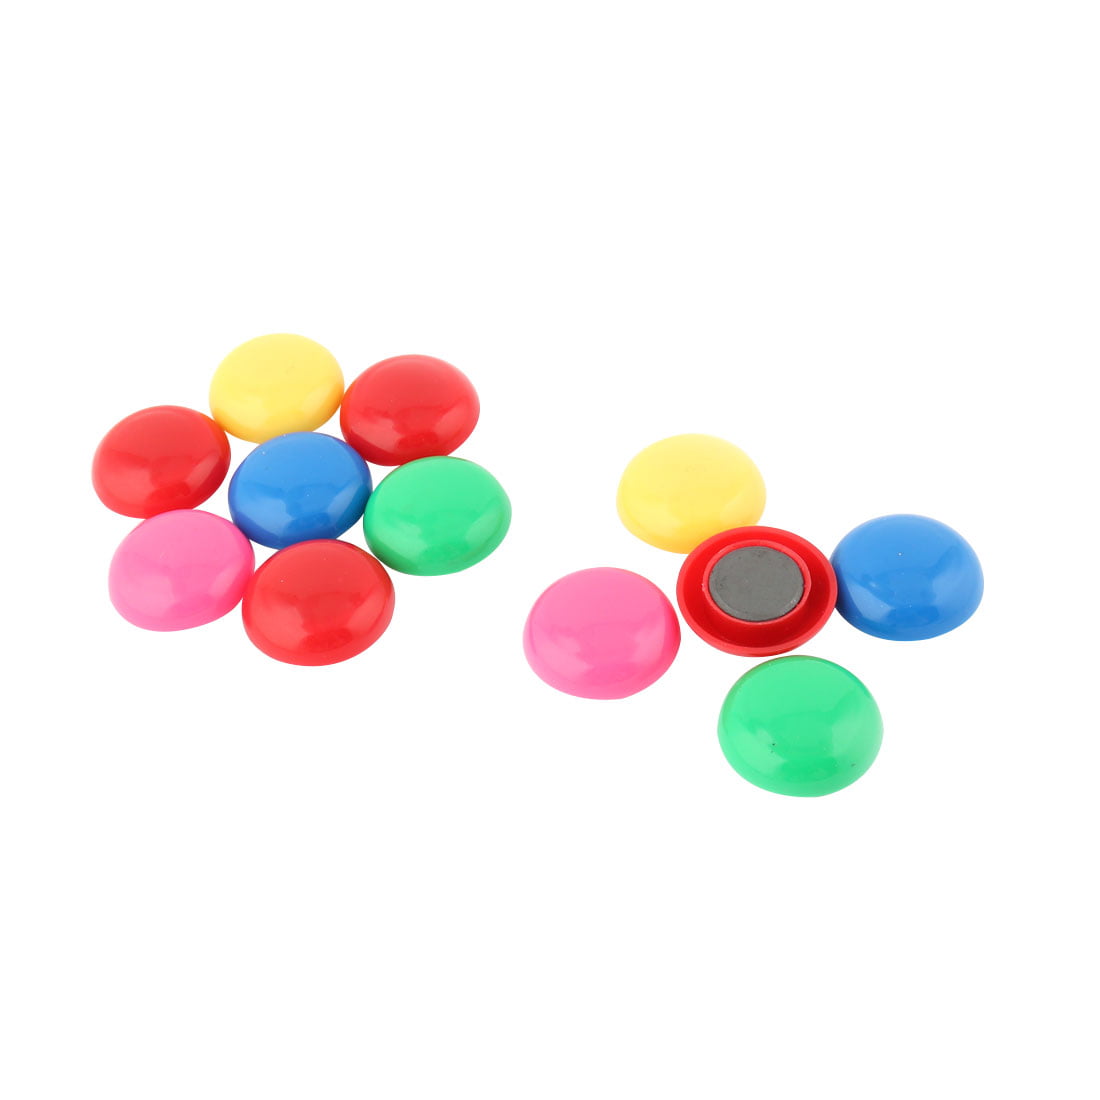 Home Plastic Shell Round Shaped Stationary Stickers Colorful 12pcs Walmart.com